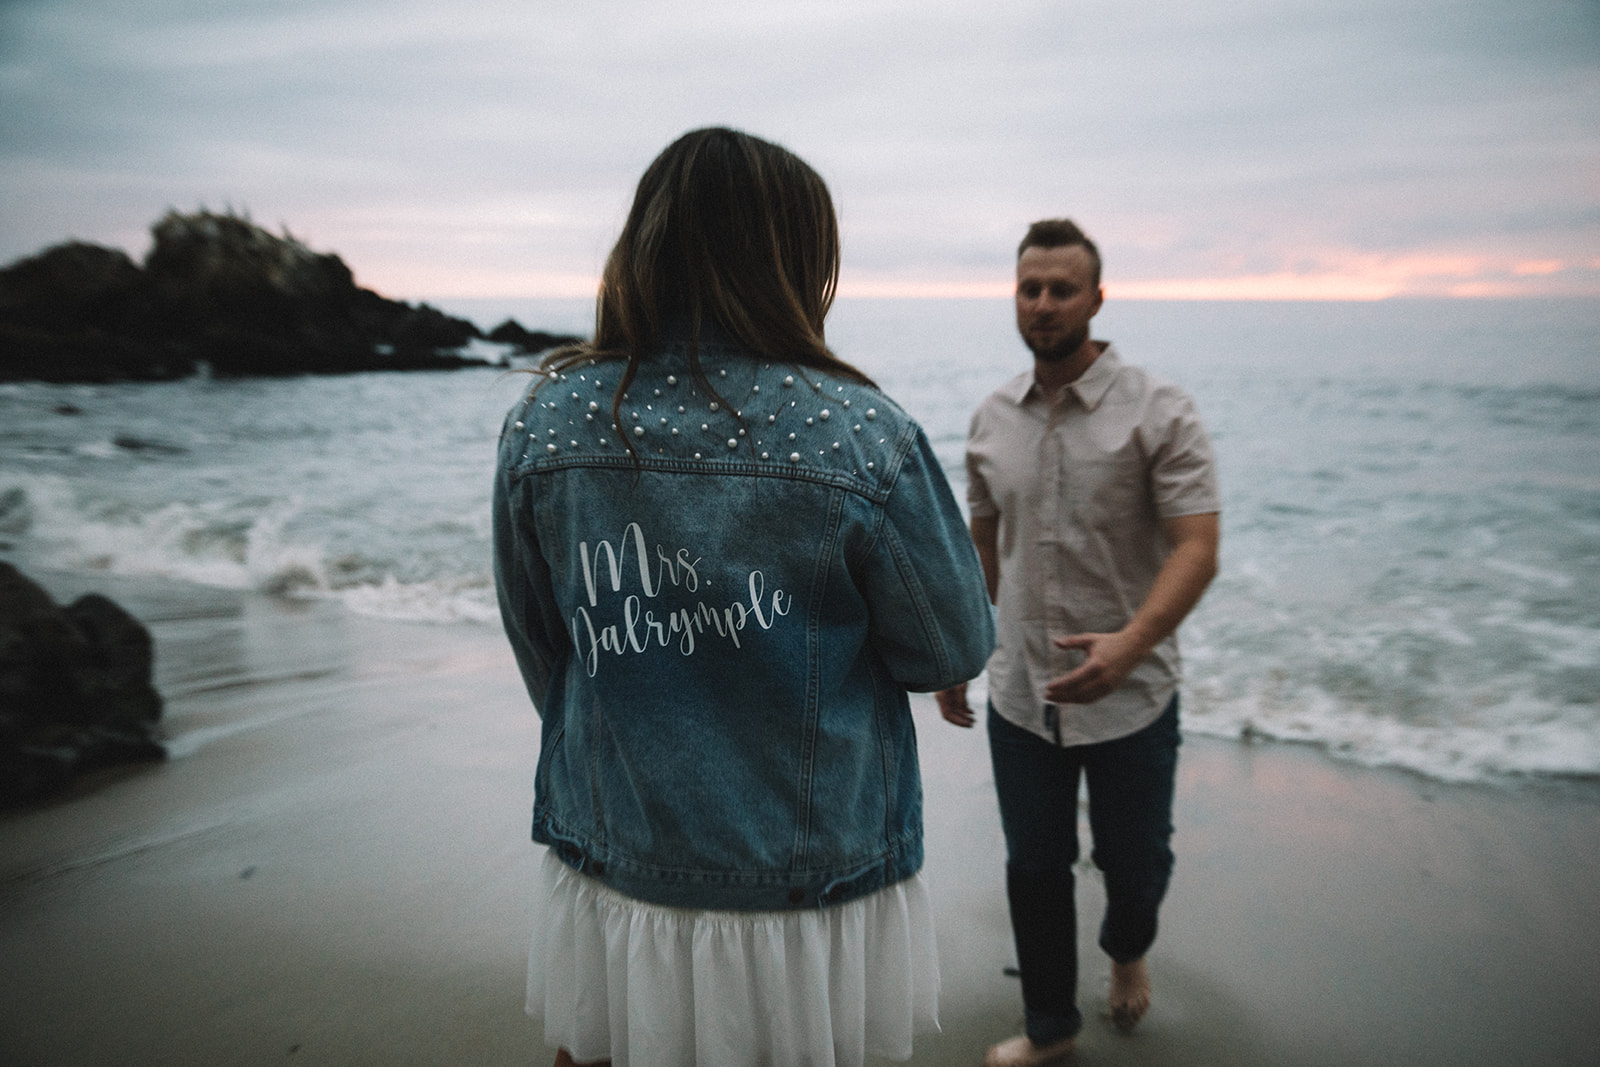 engagement session outfit ideas